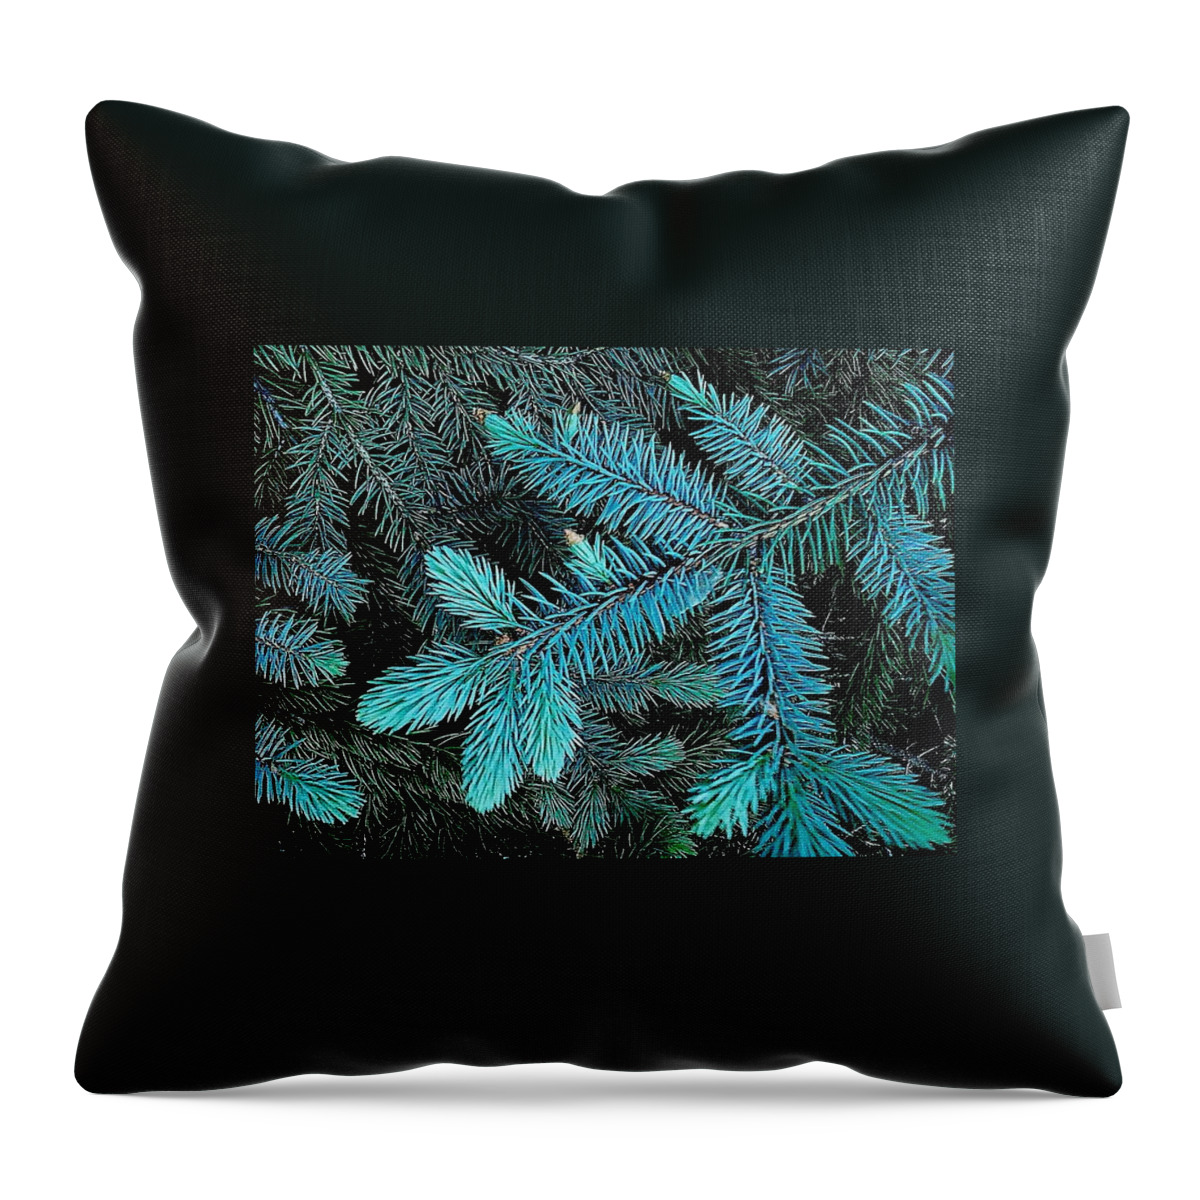 Abstract Throw Pillow featuring the photograph Blue Spruce by Daniel Thompson